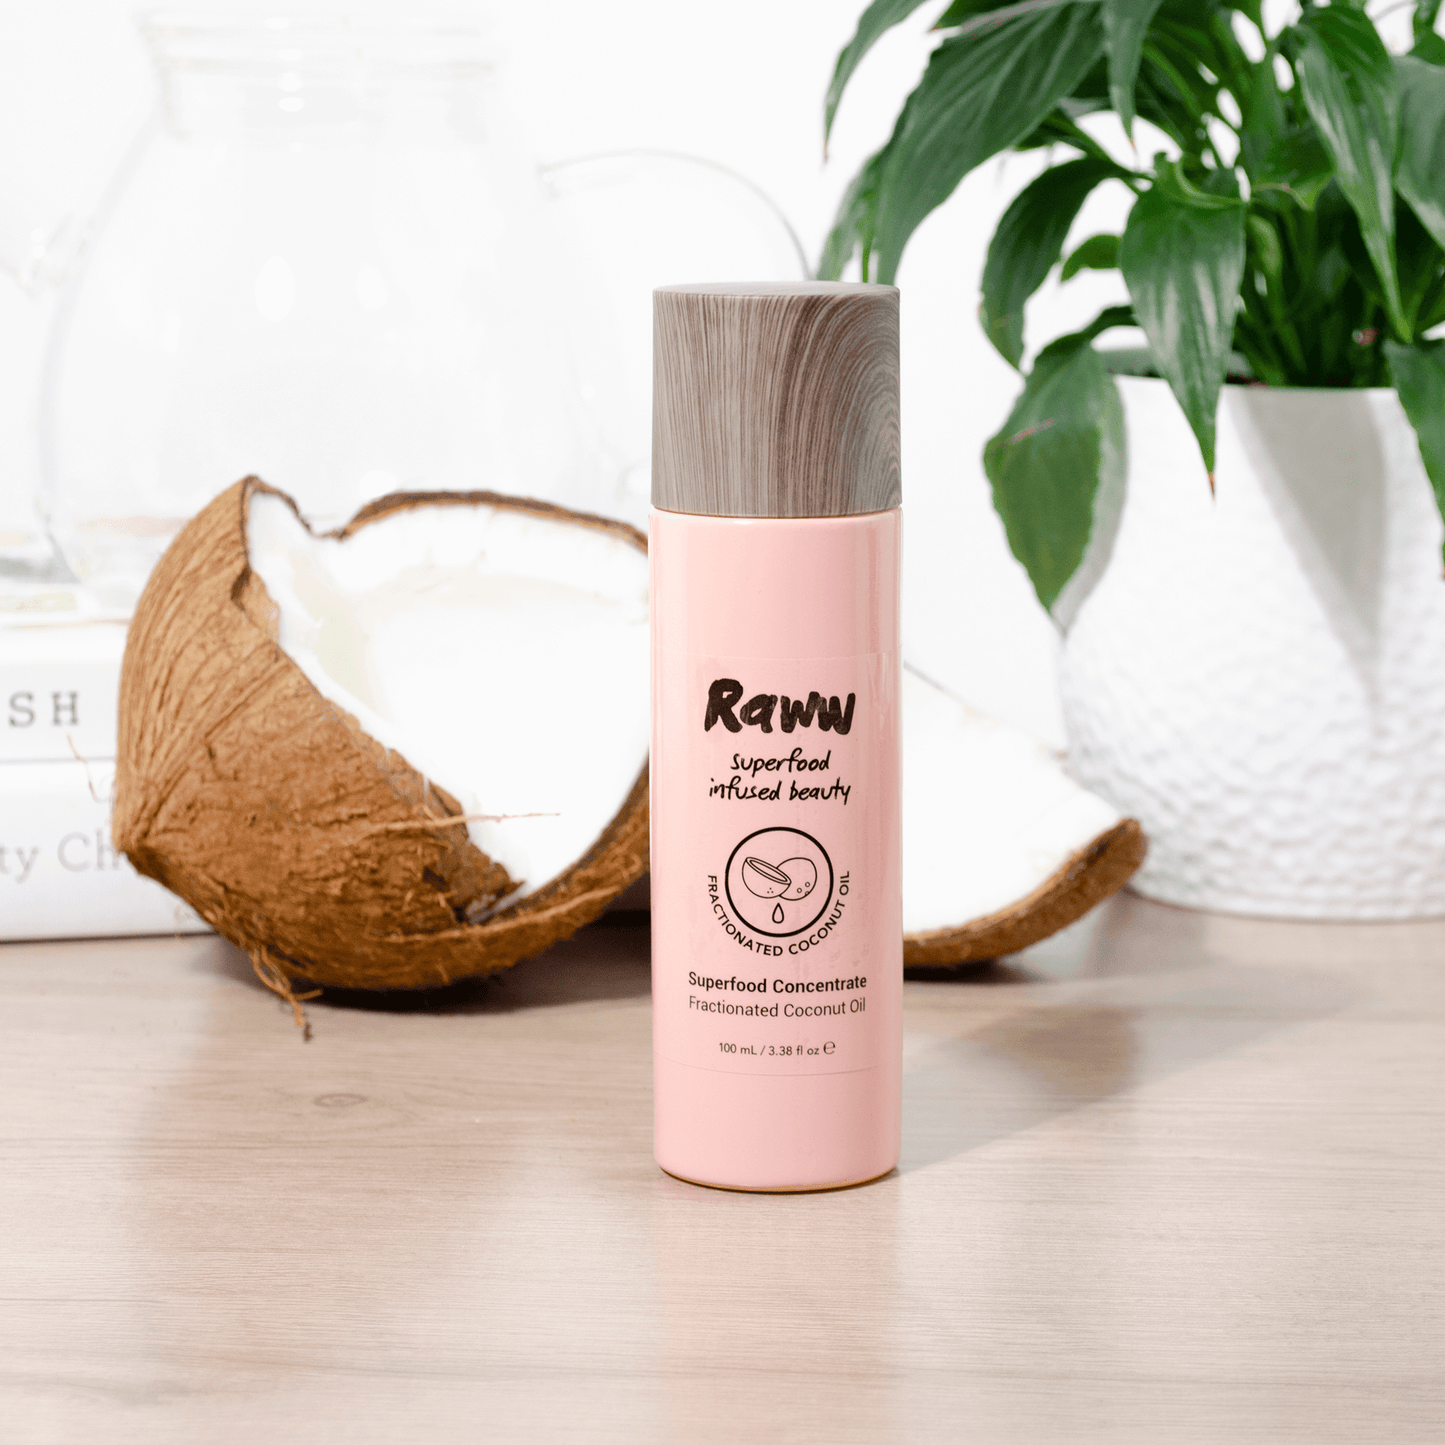 Superfood Concentrate Fractionated Coconut Oil | RAWW Cosmetics | Lifestyle 01